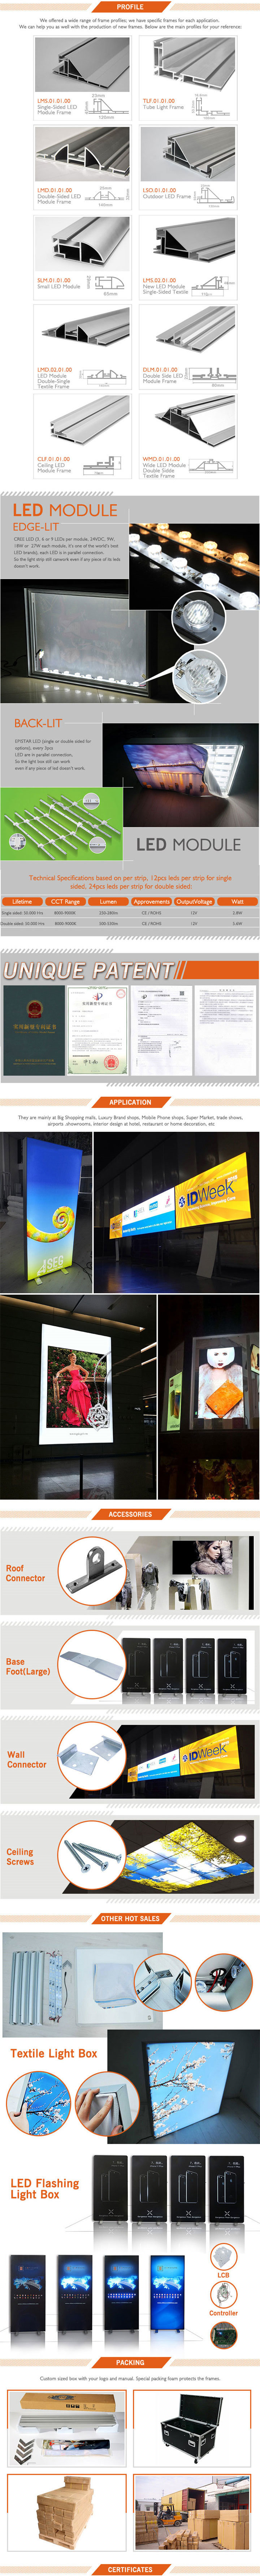 Exhibition System Retail Lightbox Booth Service Large Backlit Textile Light Box Display